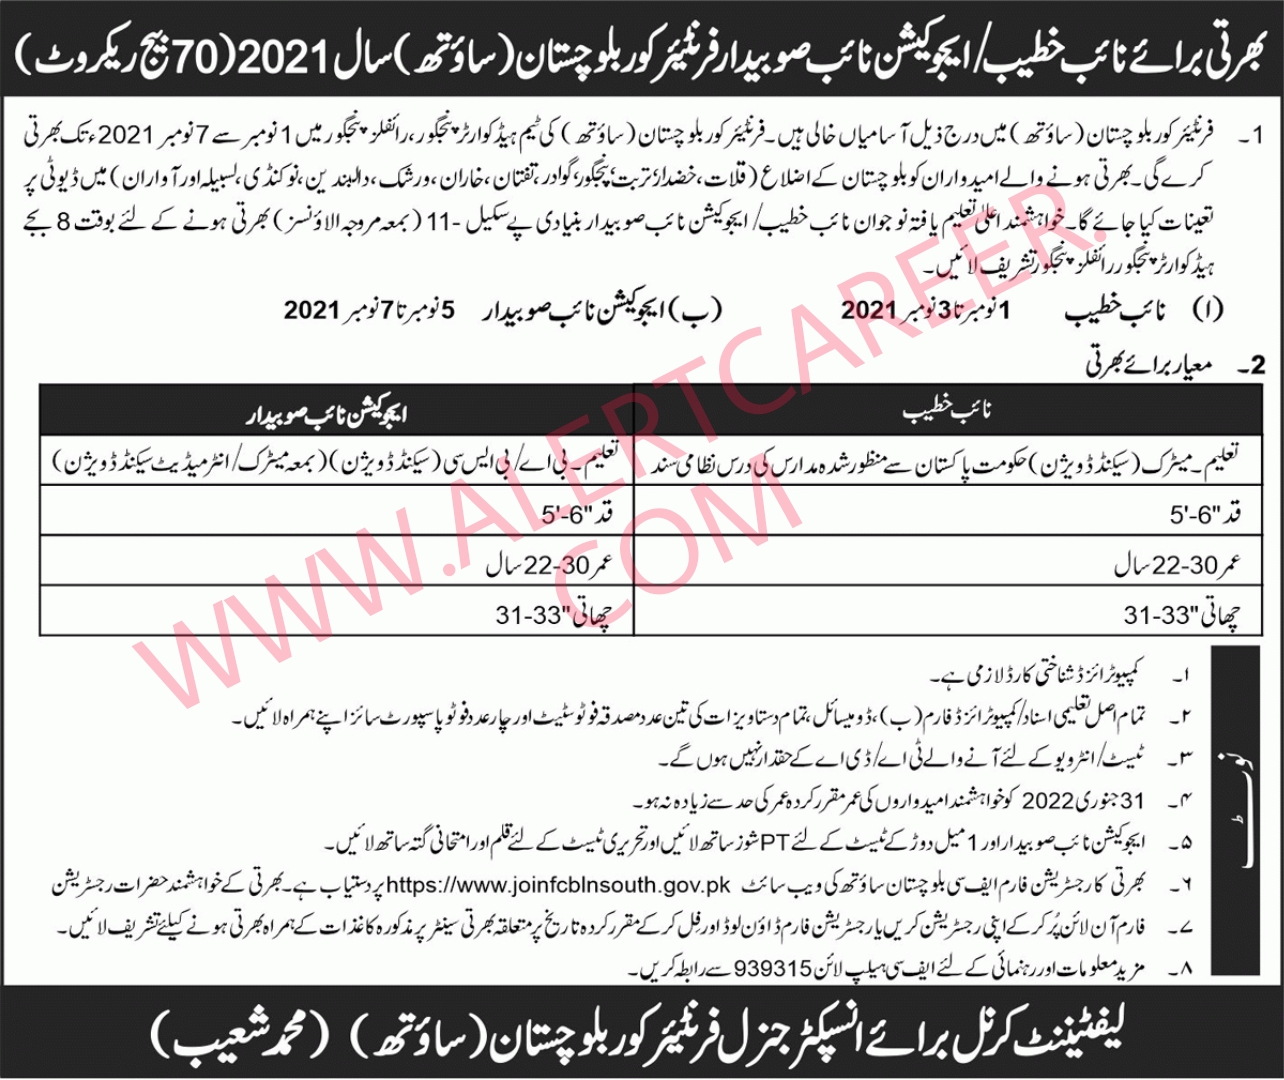 Frontier Corps South Balochistan Jobs (Join FC Jobs 2021)